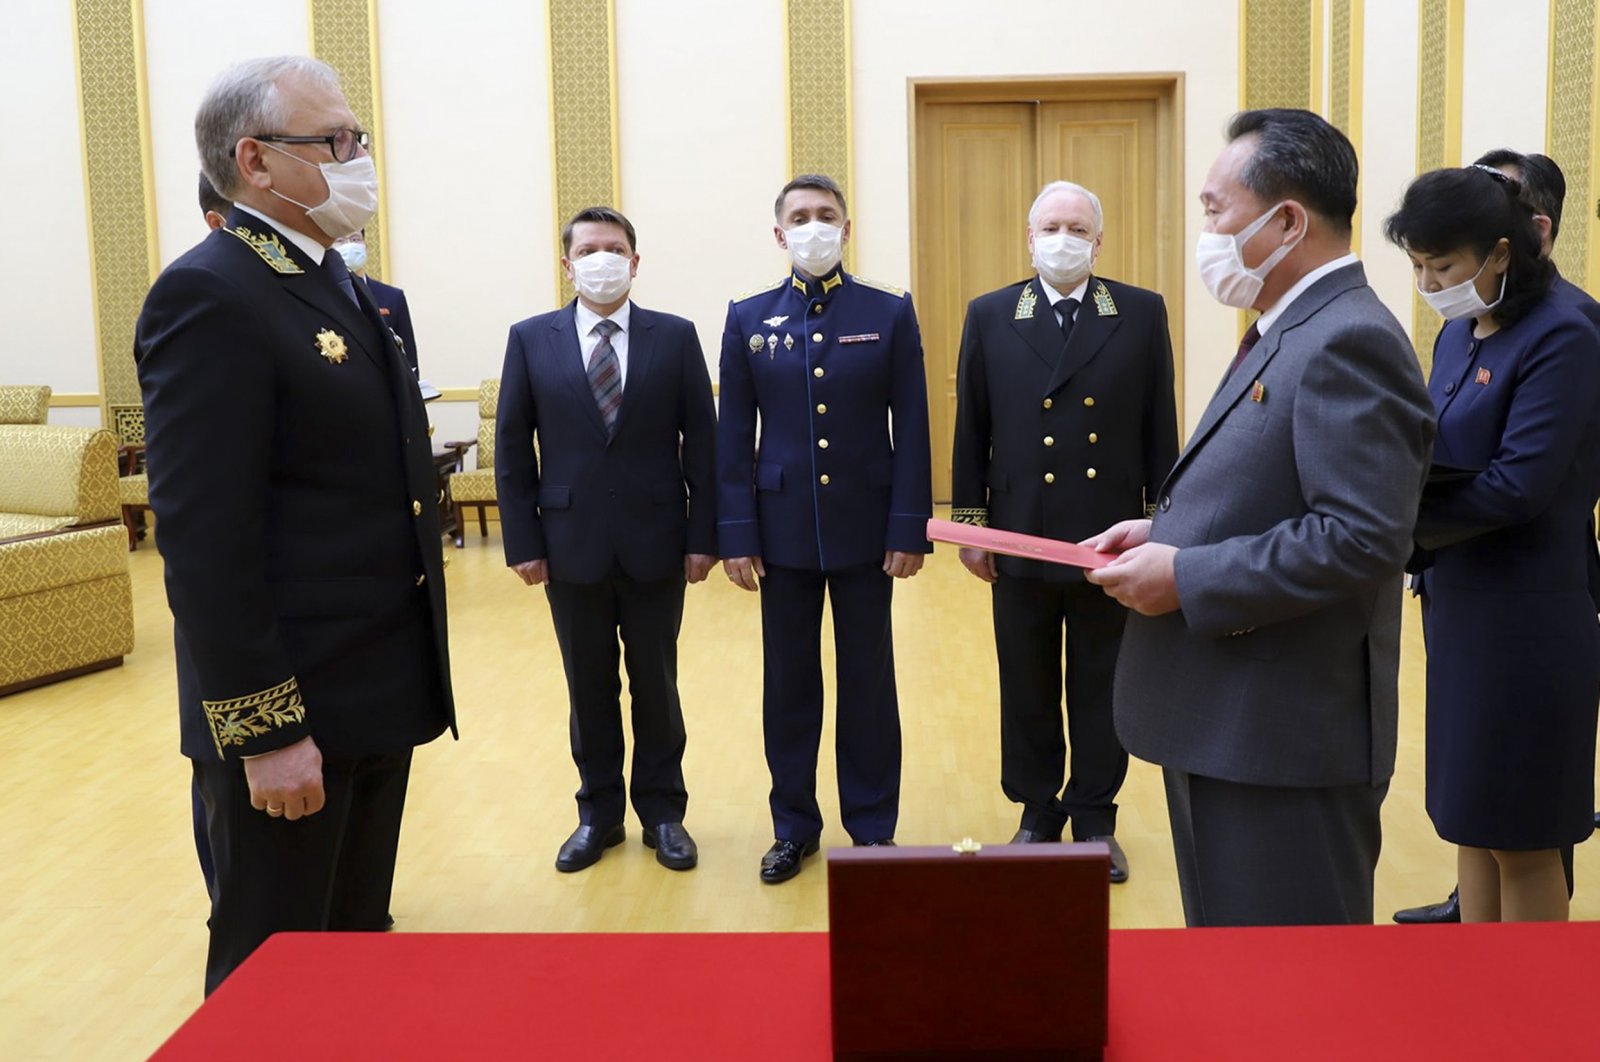 Russian Ambassador to the Democratic People's Republic of Korea Alexander Matsegora (L) and DPRK Foreign Minister Ri Son-gwon (R), both wearing face masks to protect against the novel coronavirus, attend a ceremony awarding North Korean leader Kim Jong-un with Russia's 75th anniversary Victory medal for his major contribution in commemorating Soviet soldiers, Pyongyang, North Korea, May 5, 2020. (AP Photo)